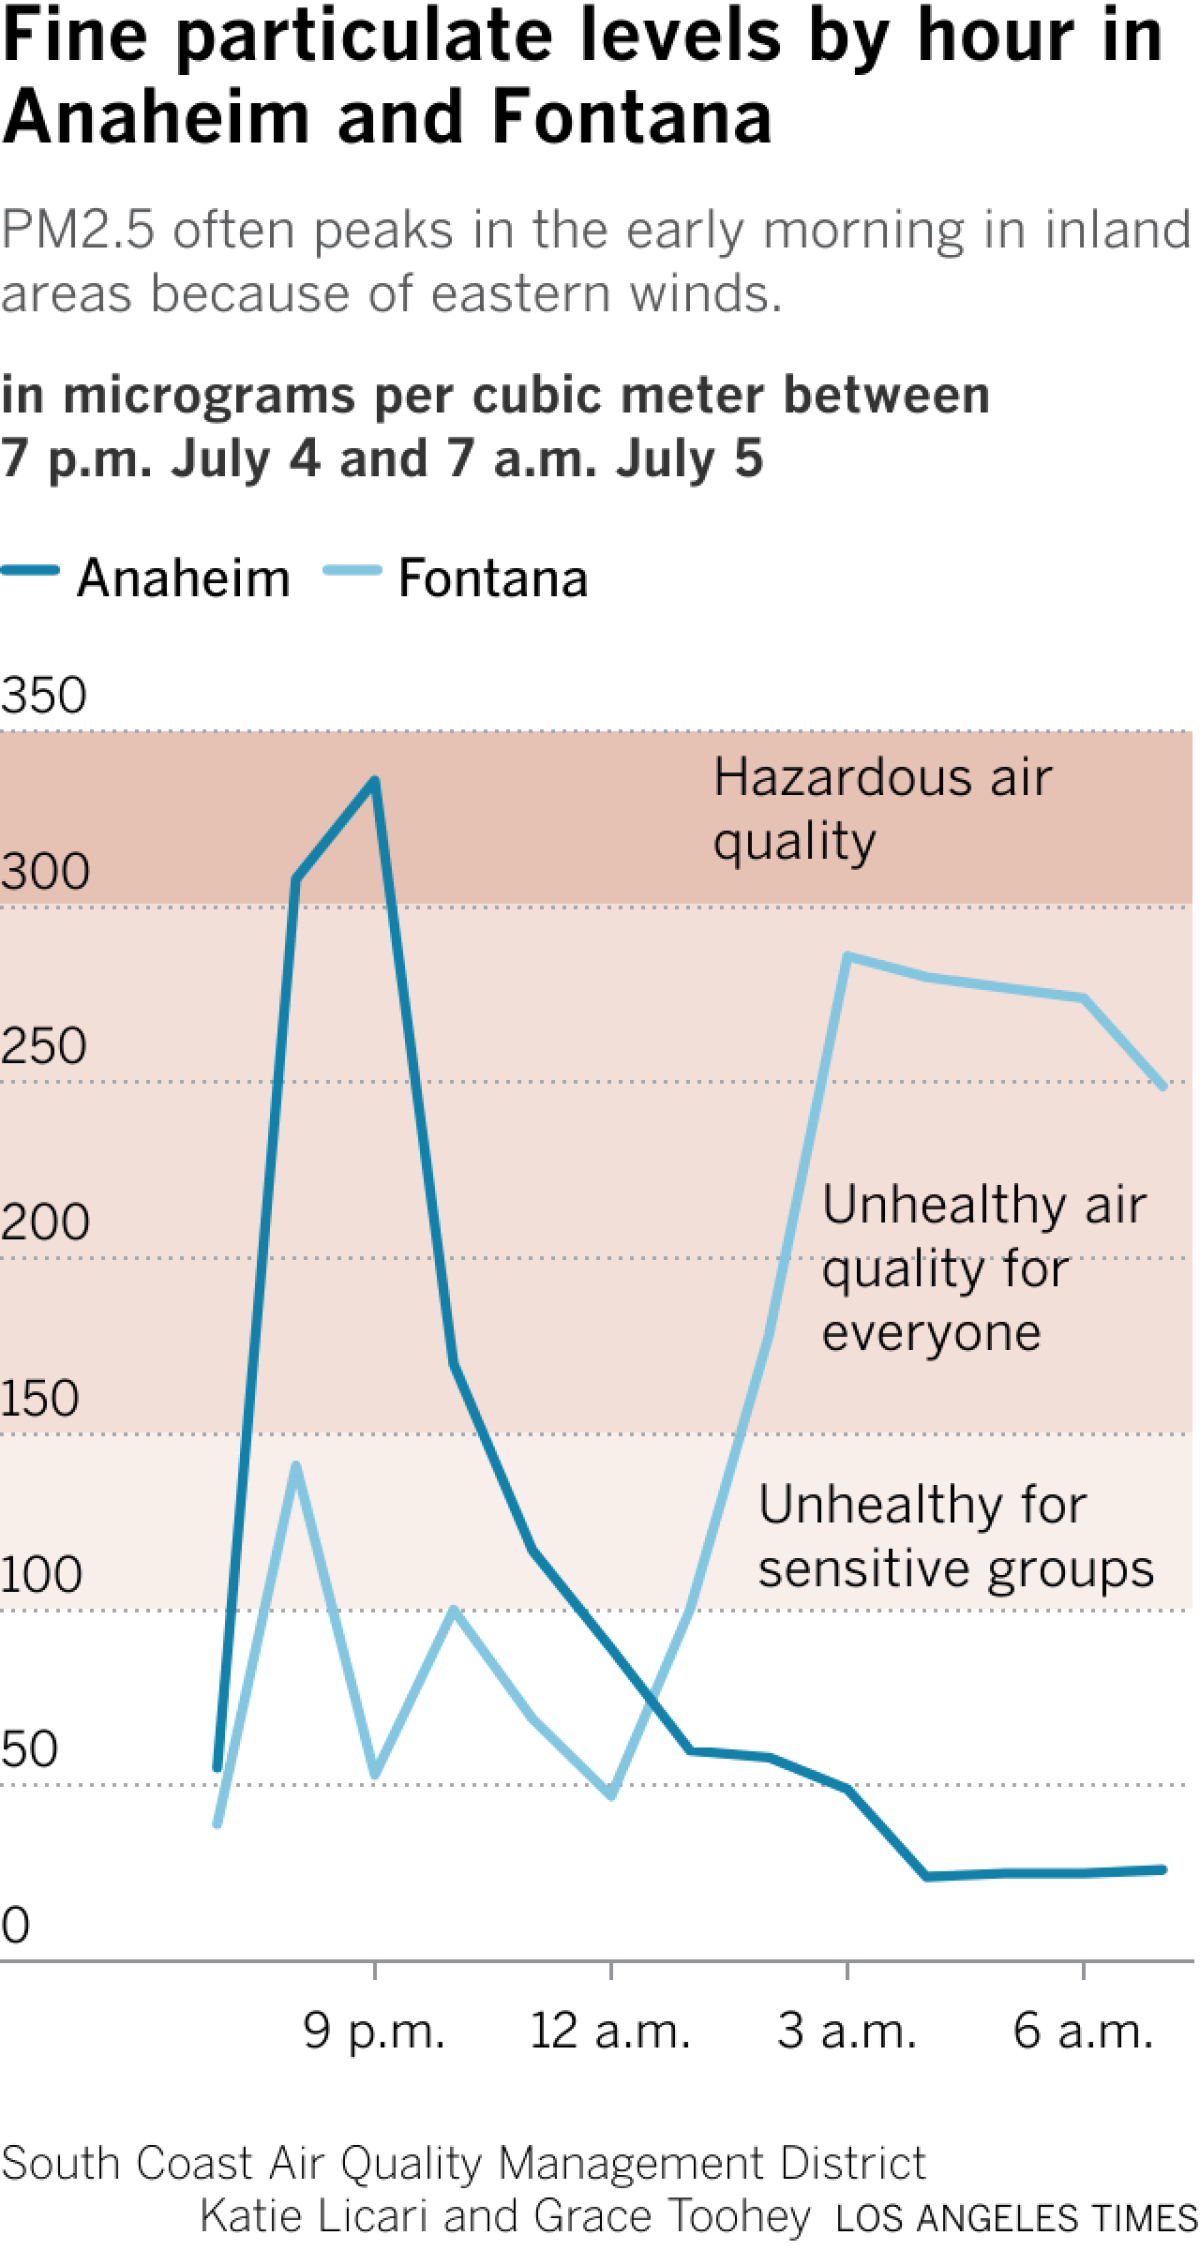 This is a multiple line chart showing the PM2.5 levels for Anaheim and Fontana compared to unhealthy and hazardous air quality ranges. 